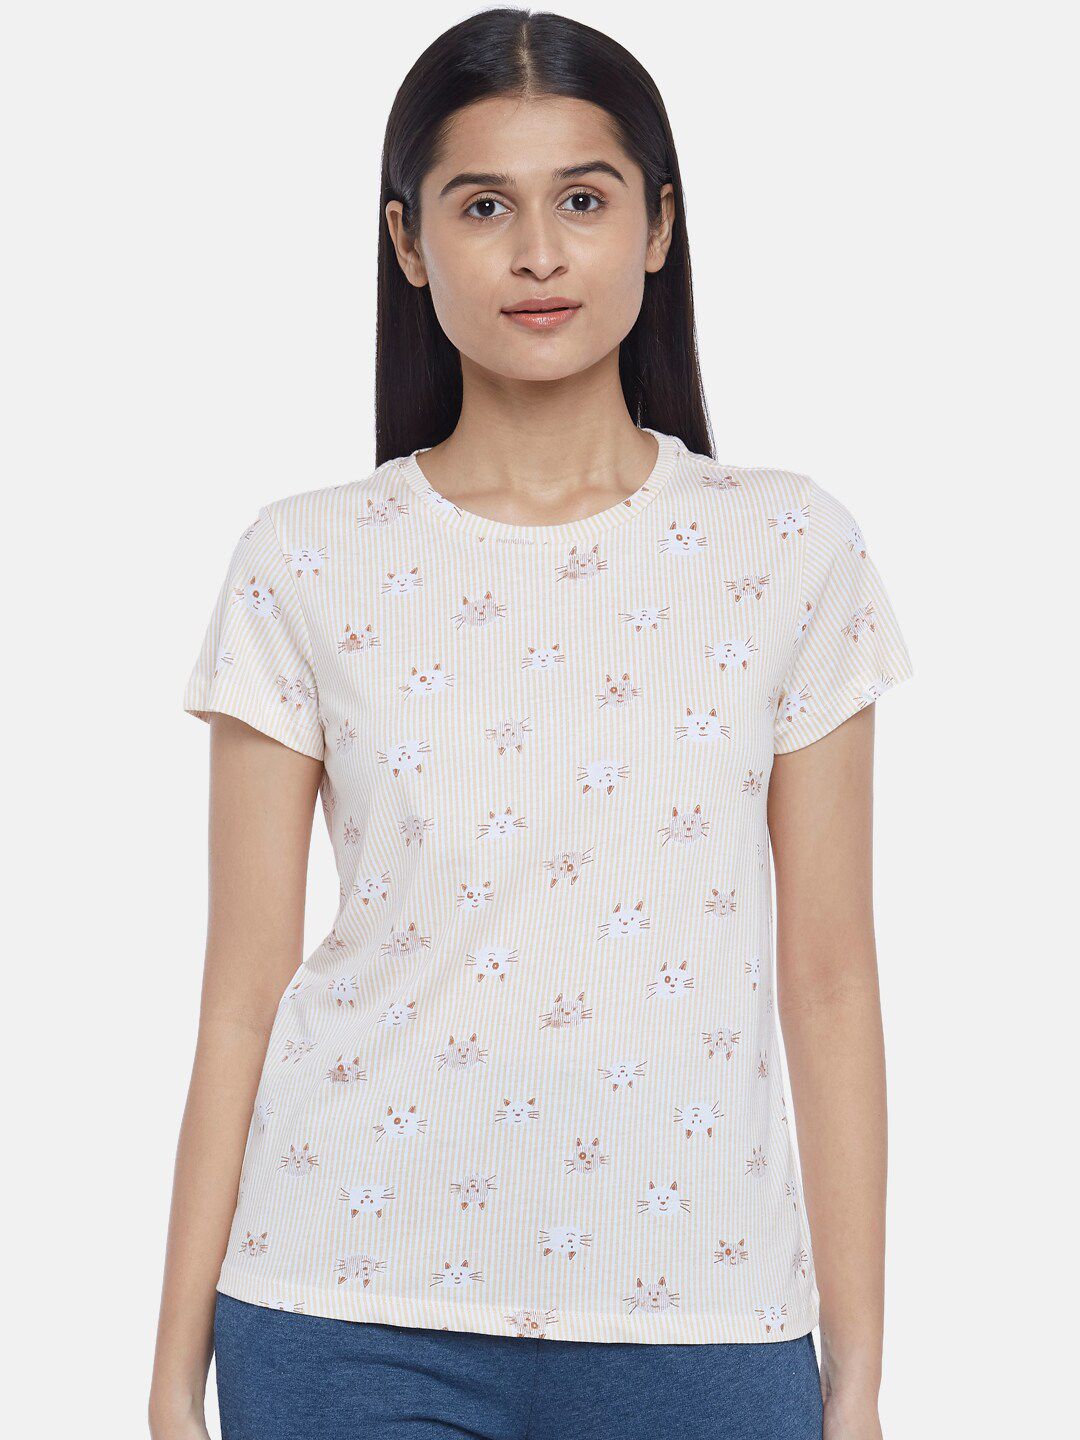 Dreamz by Pantaloons Cream-Coloured Printed Pure Cotton Lounge tshirt Price in India